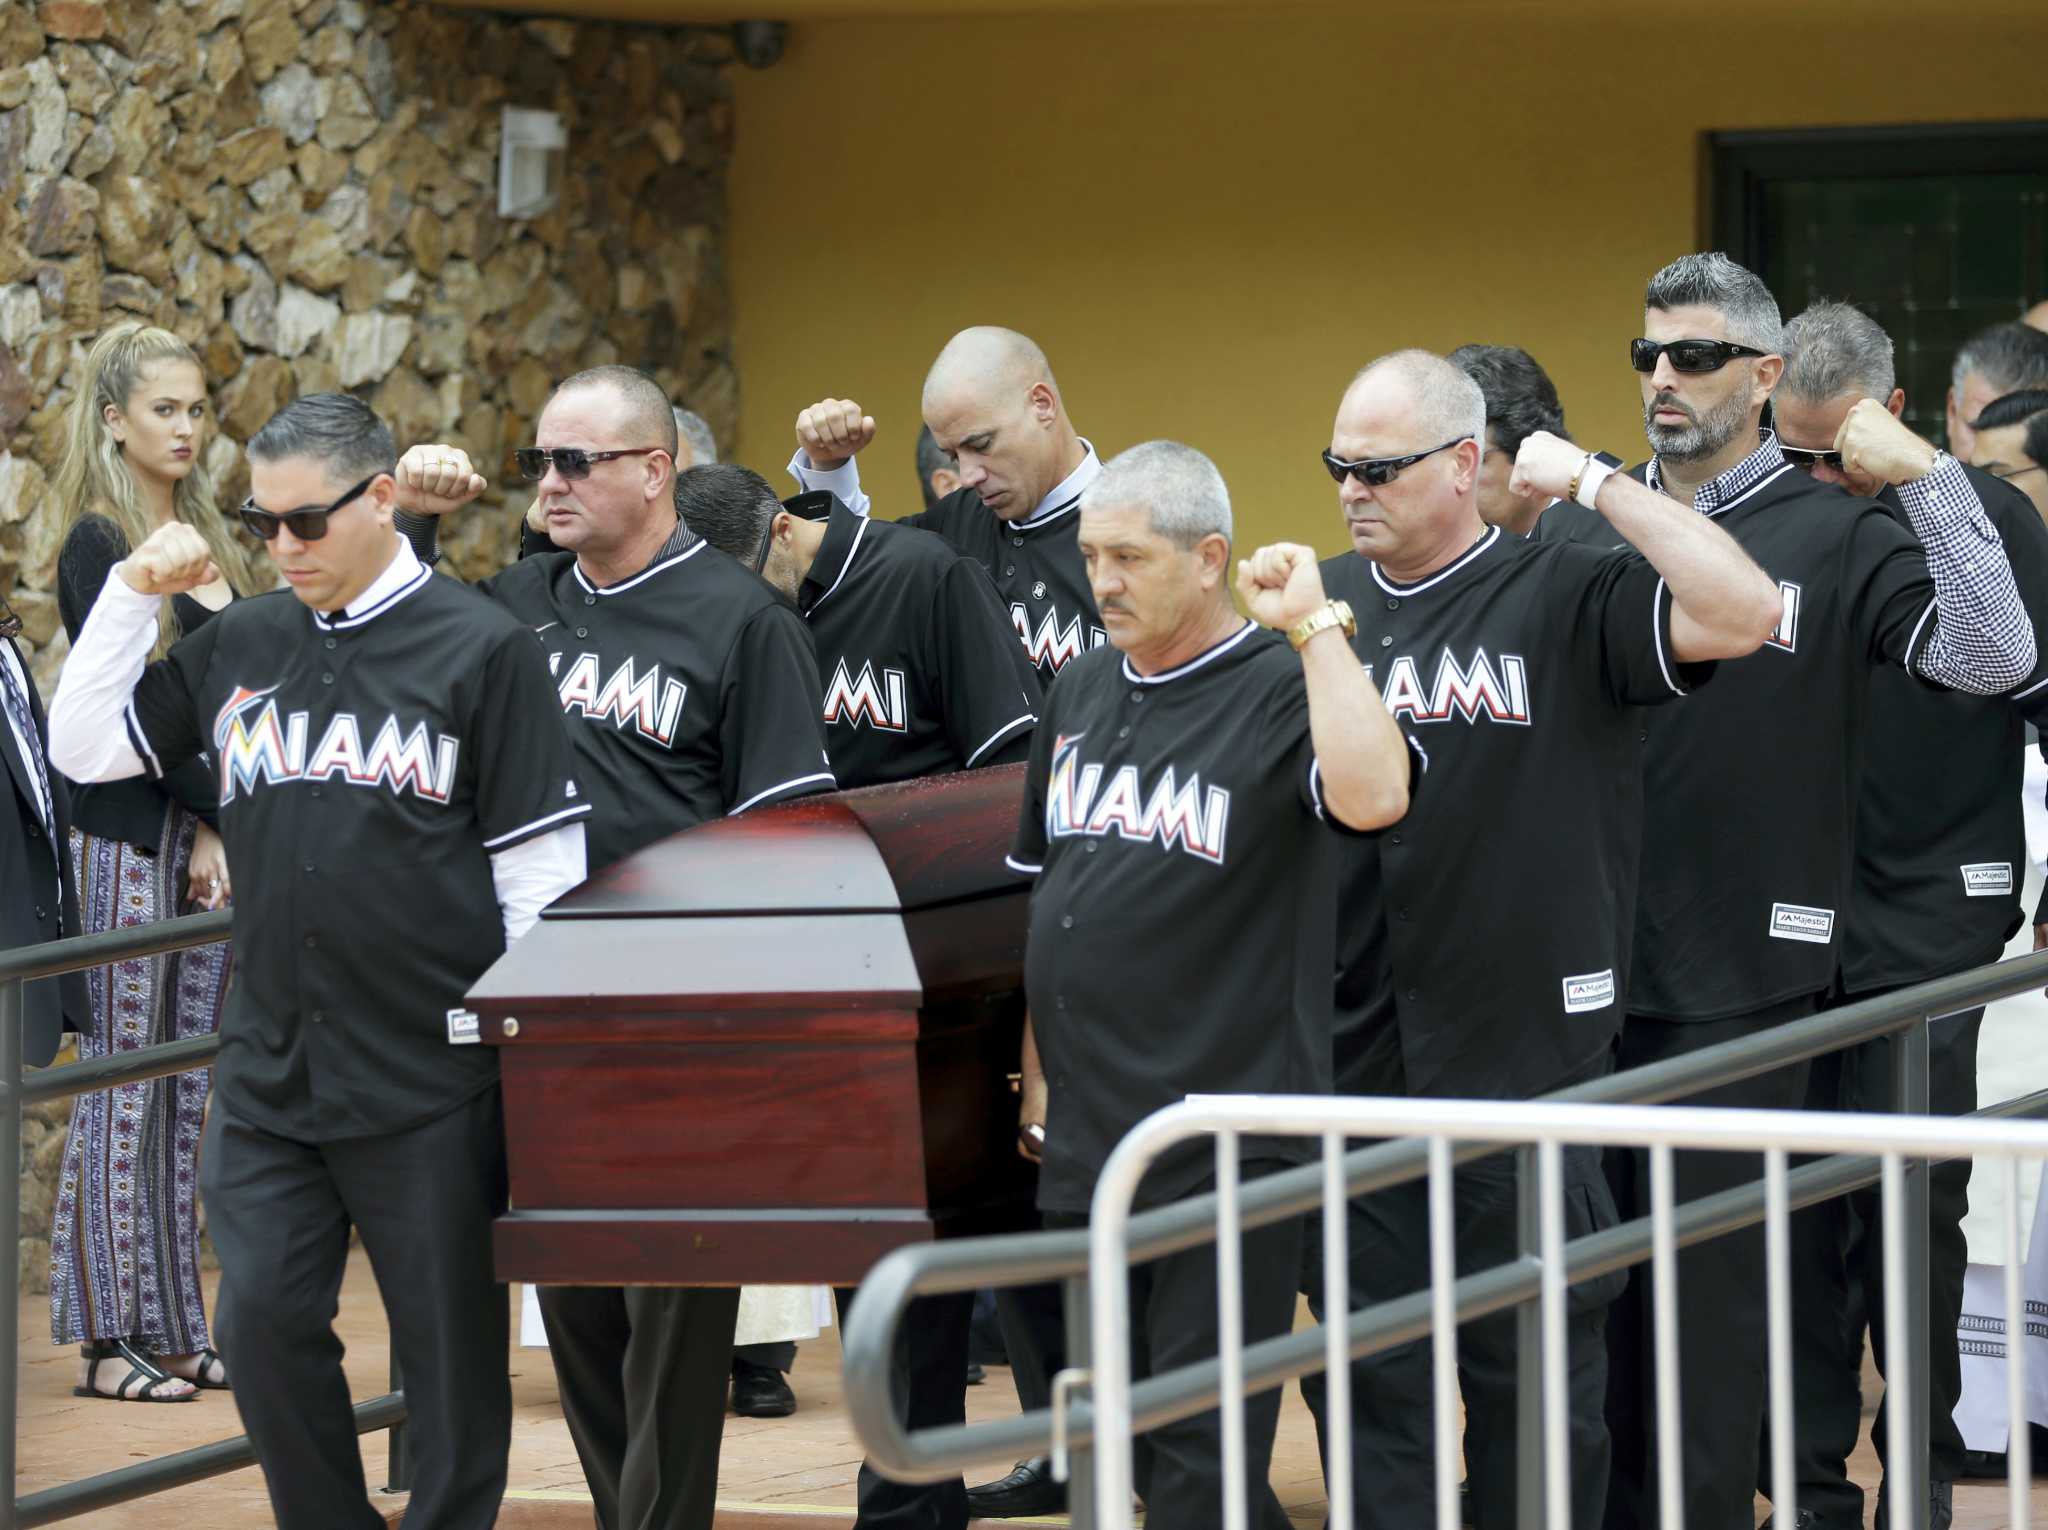 Jose Fernandez remembered as larger than life at funeral